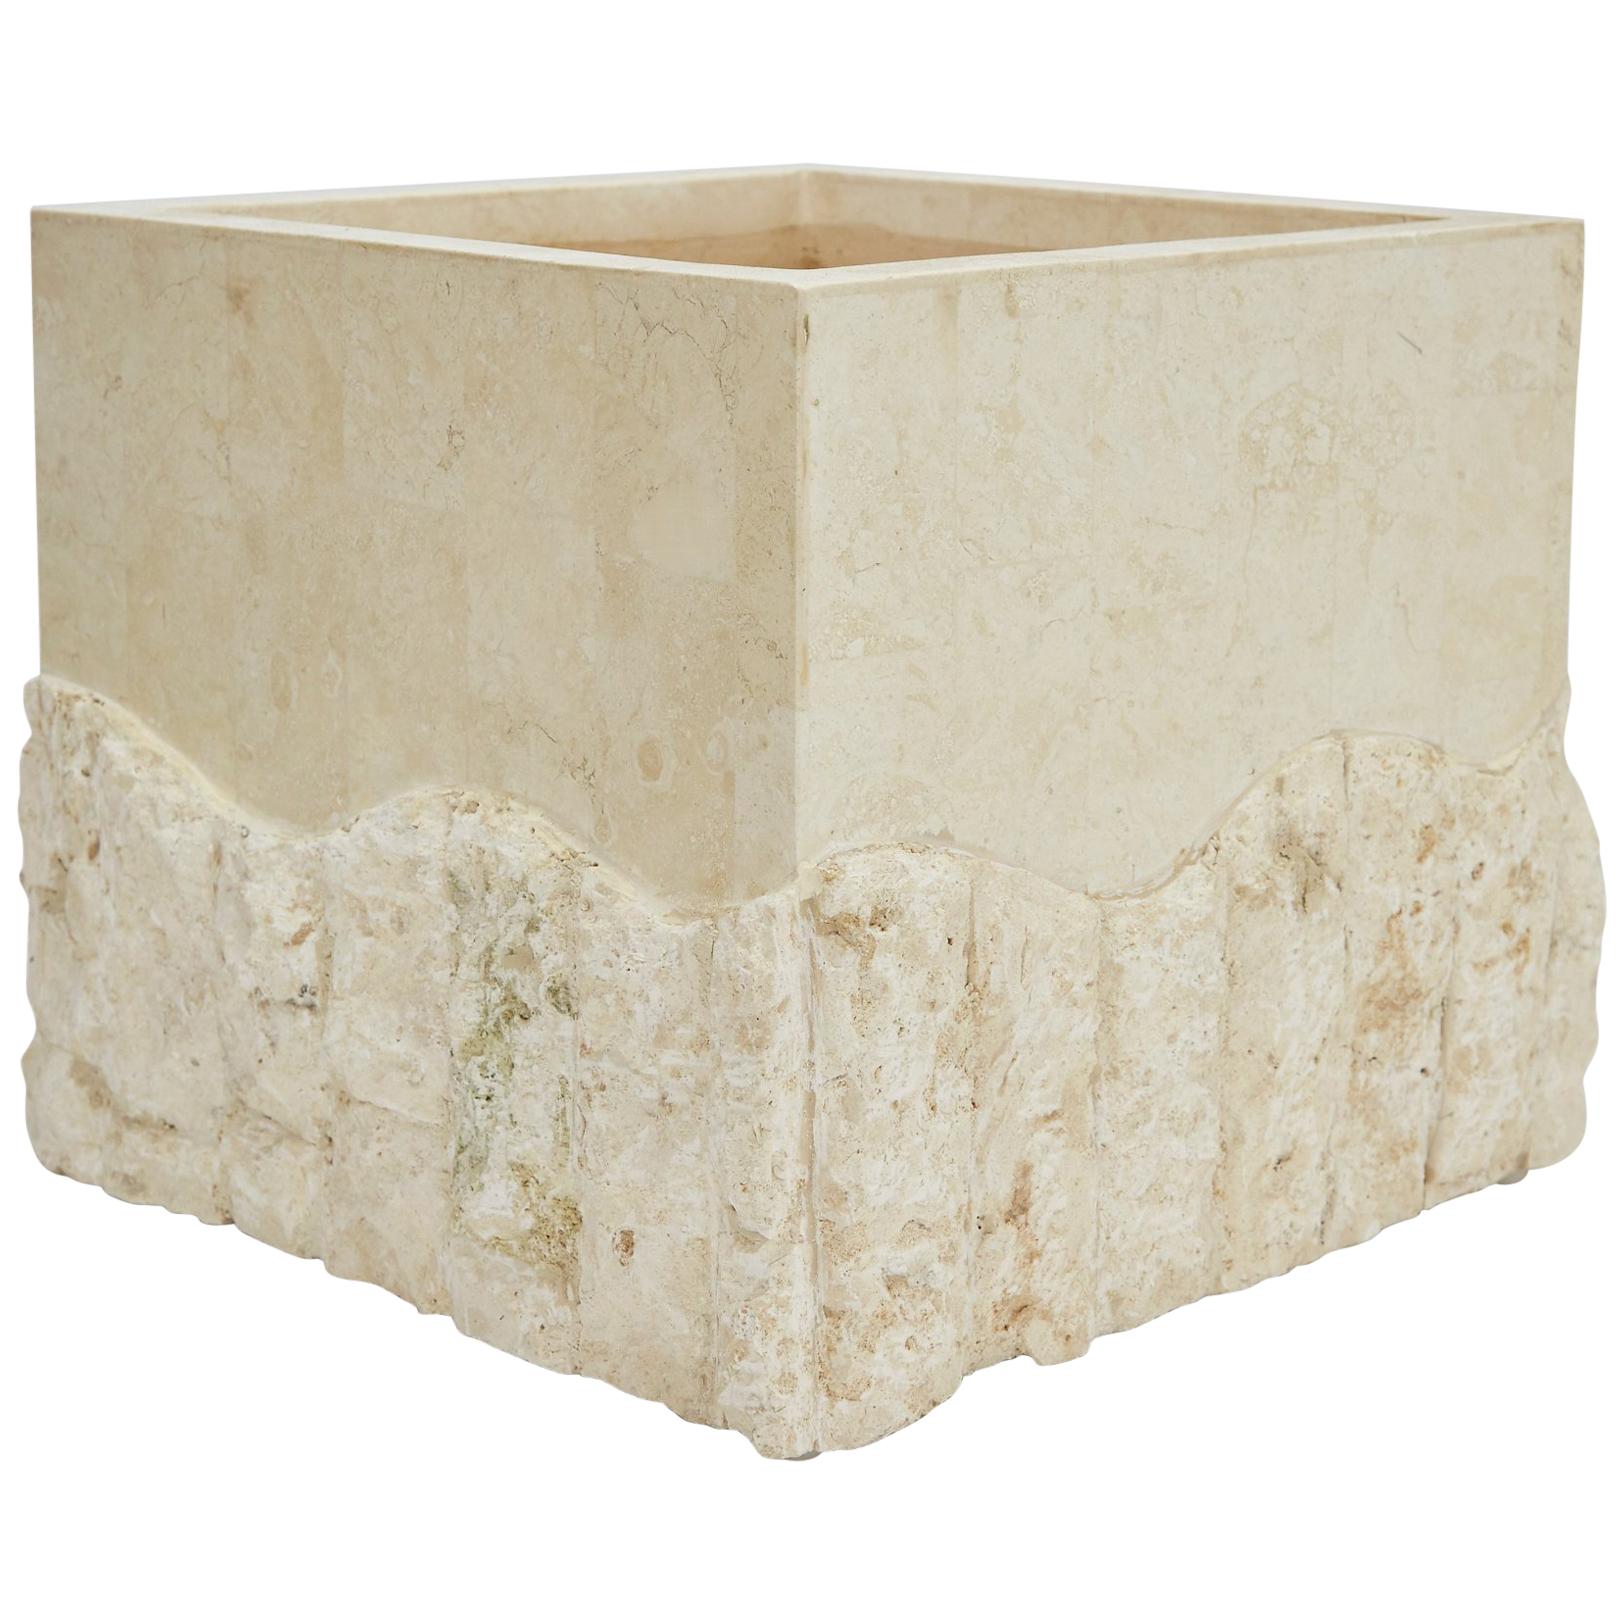 Medium Tessellated White Stone Square Rough and Smooth Planter, 1990s For Sale